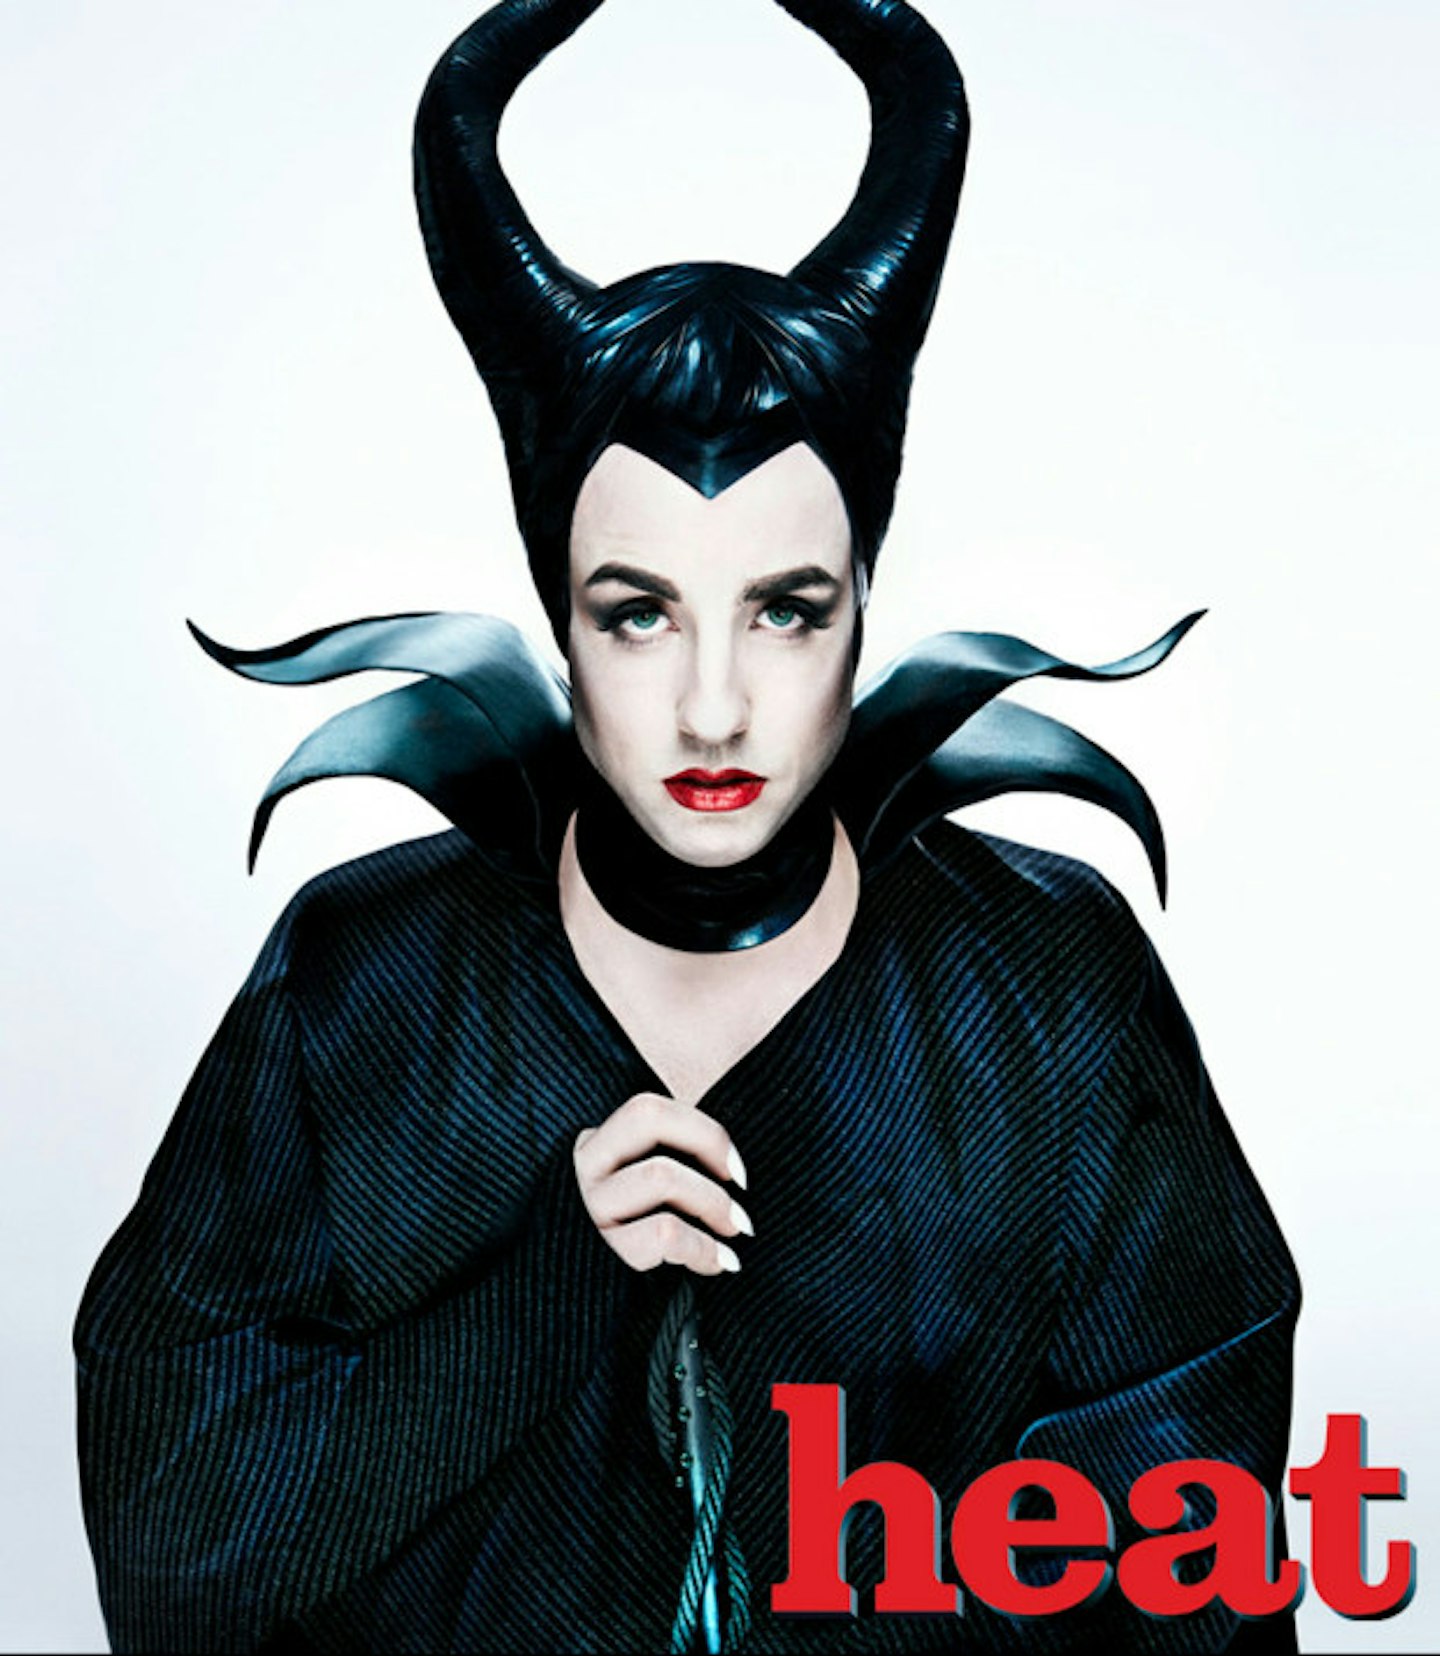 Stevi Ritchie as Maleficent